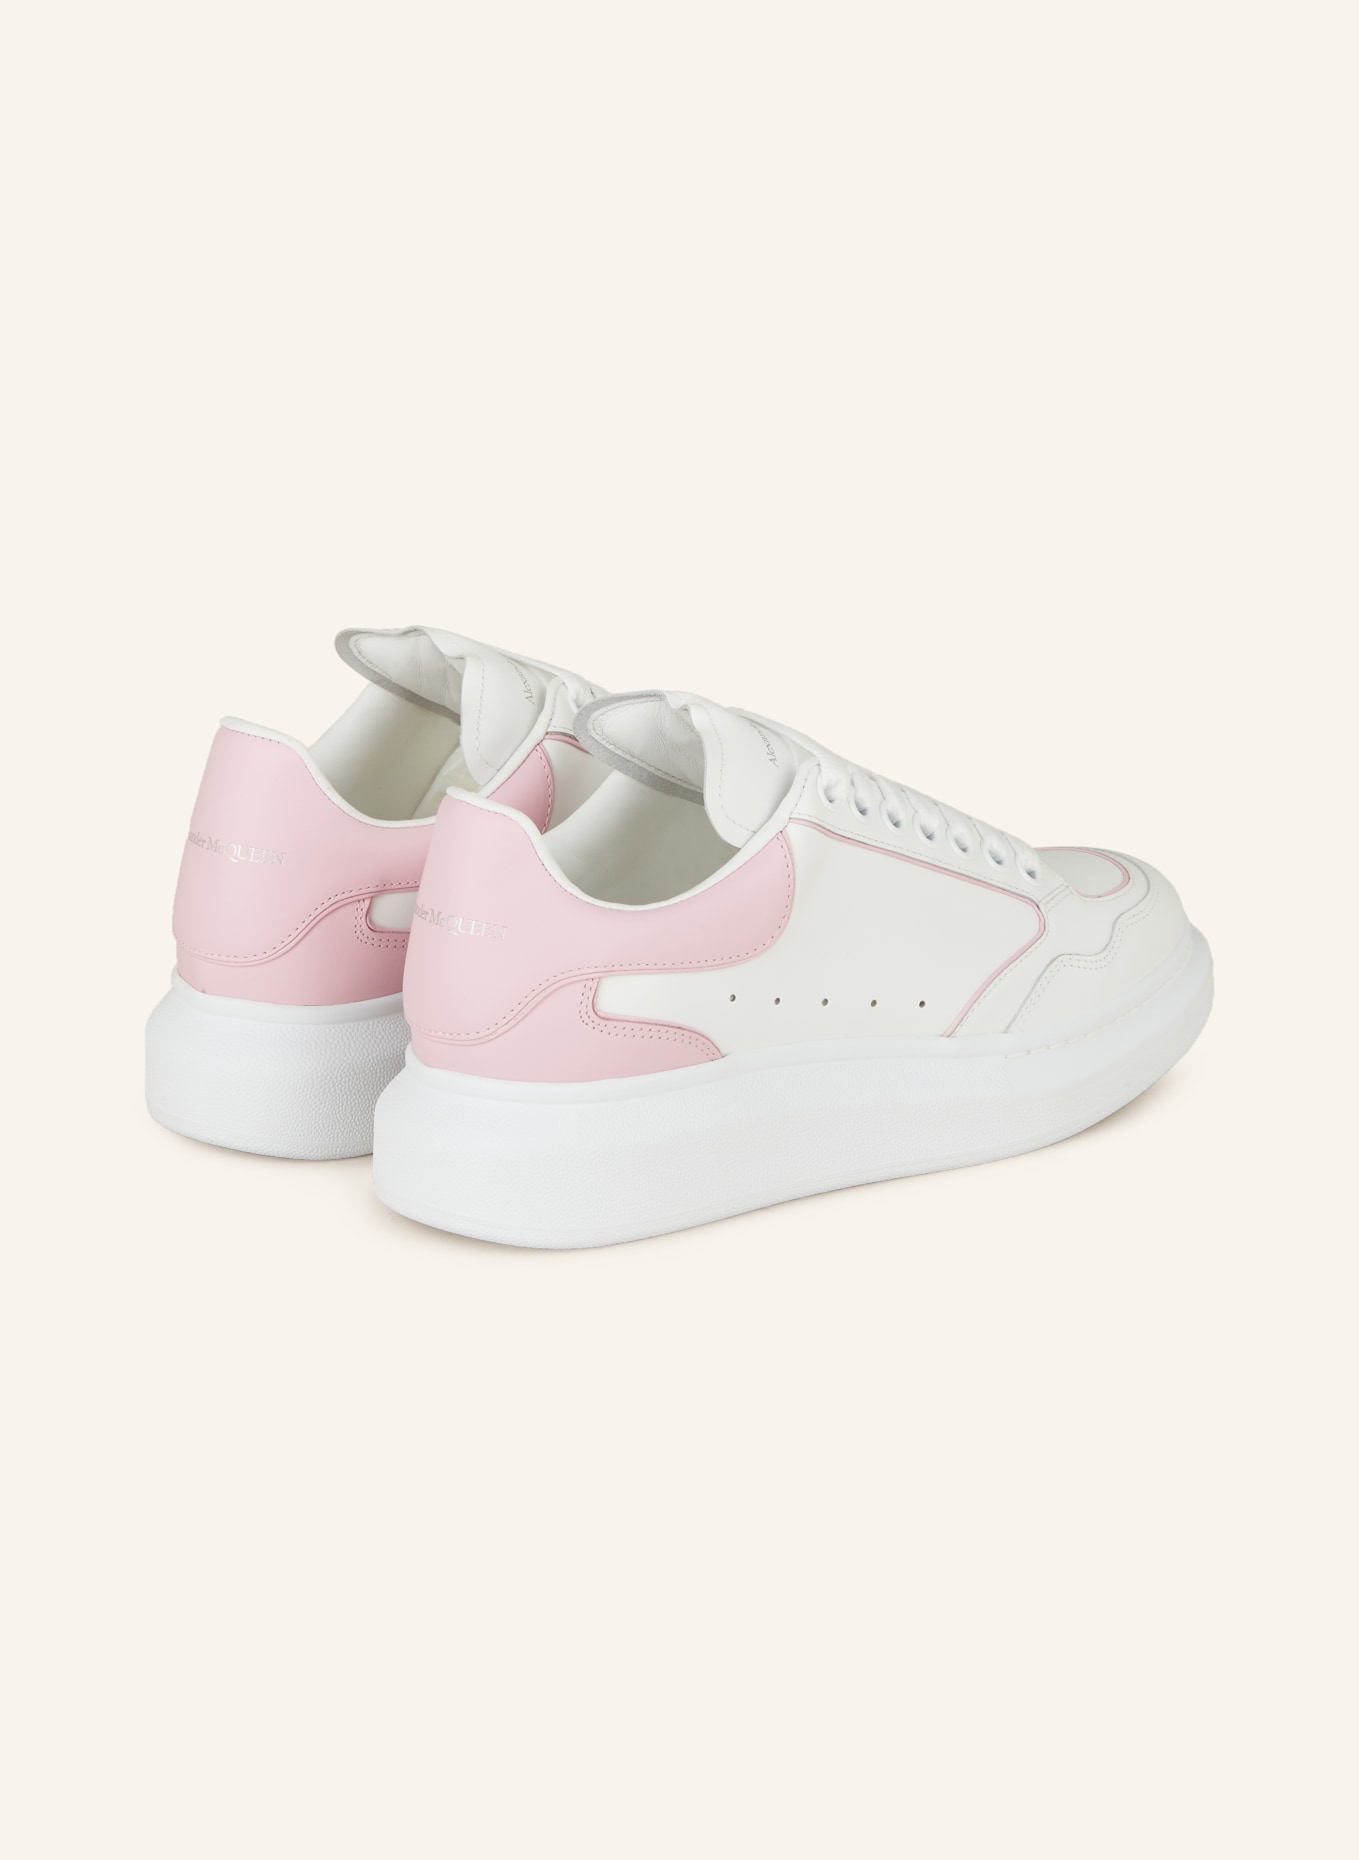 Authentic Guaranteed Alexander McQueen White/Light pink Sneaker 36 Fit US  6.5 | eBay